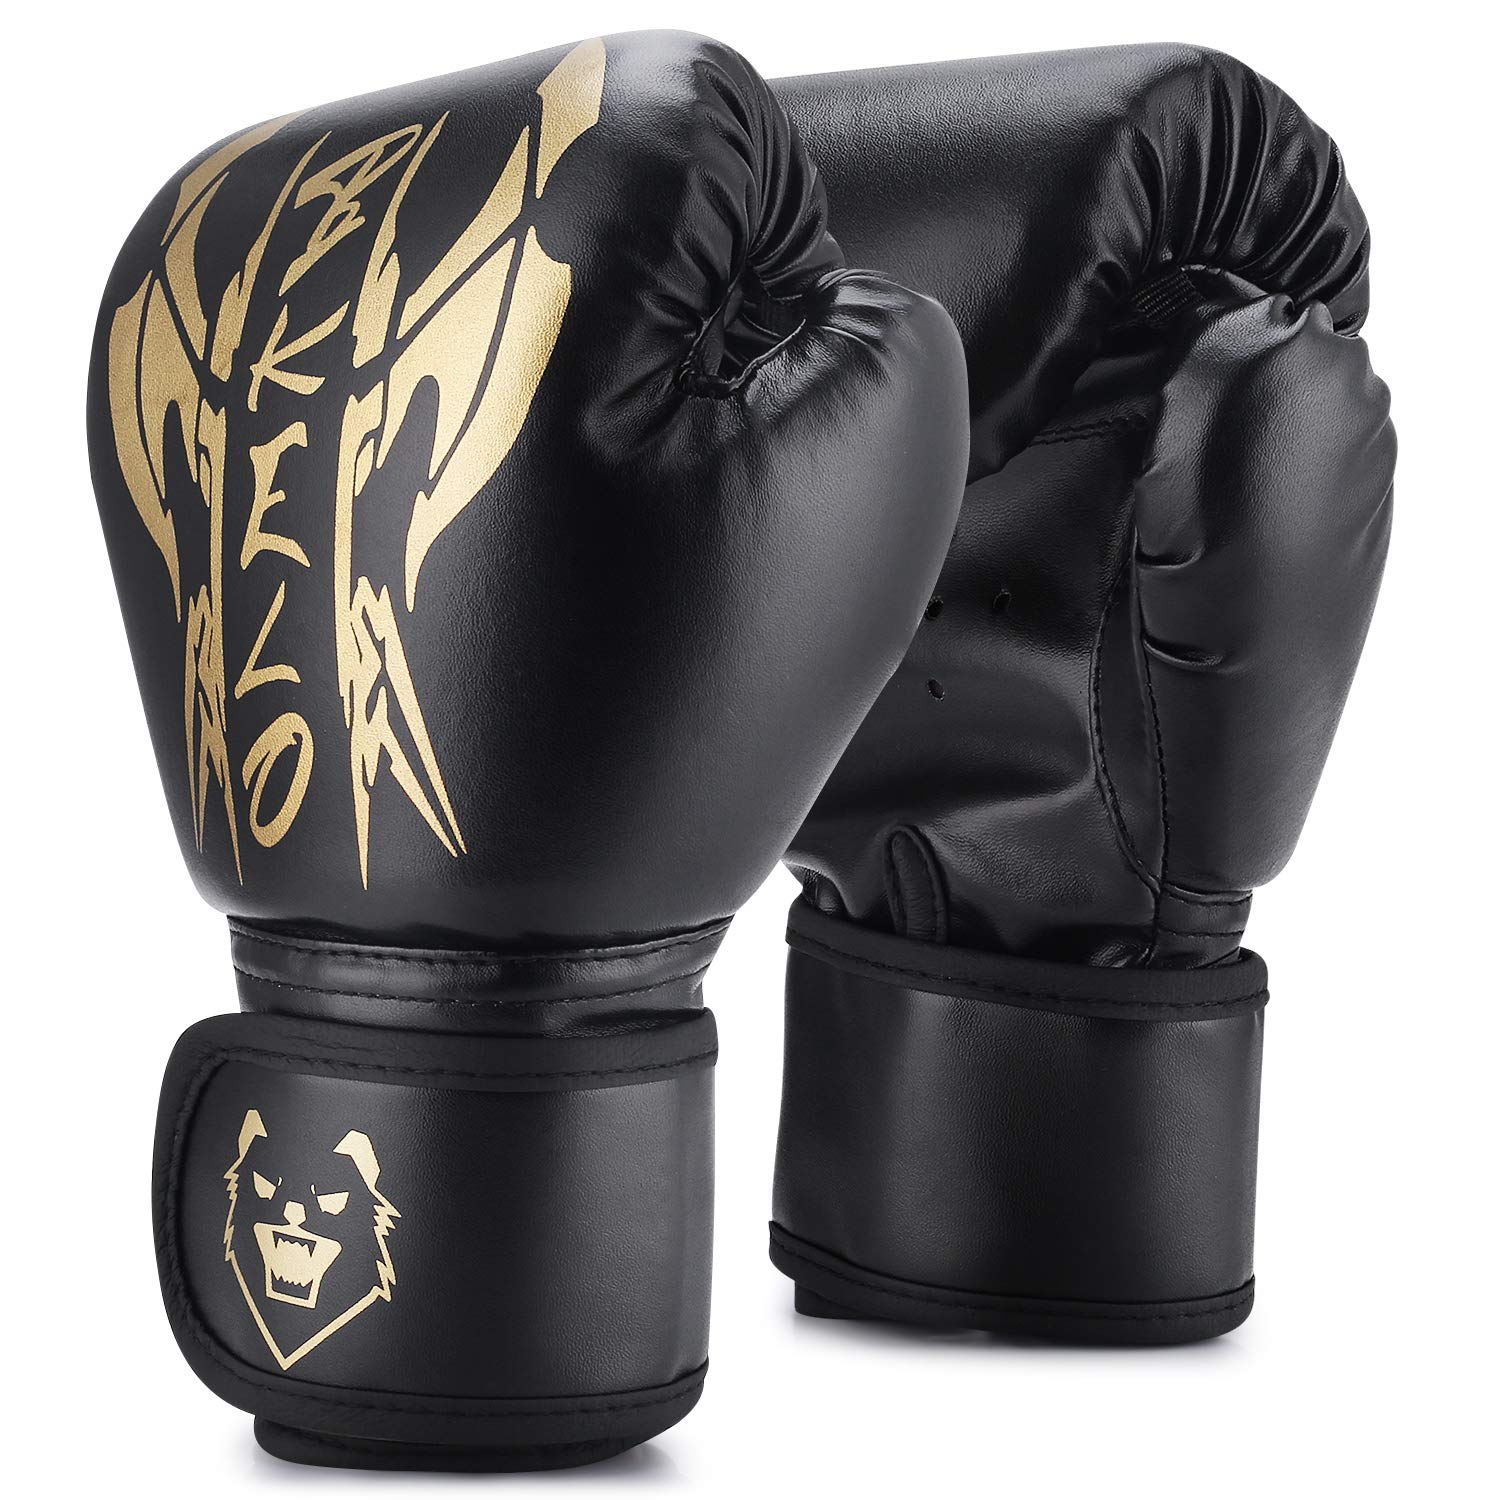 Boxing Gloves Military Edition Leather MMA UFC Muay Thai Kick Boxing K1  Karate Training Sparring Punching Gloves